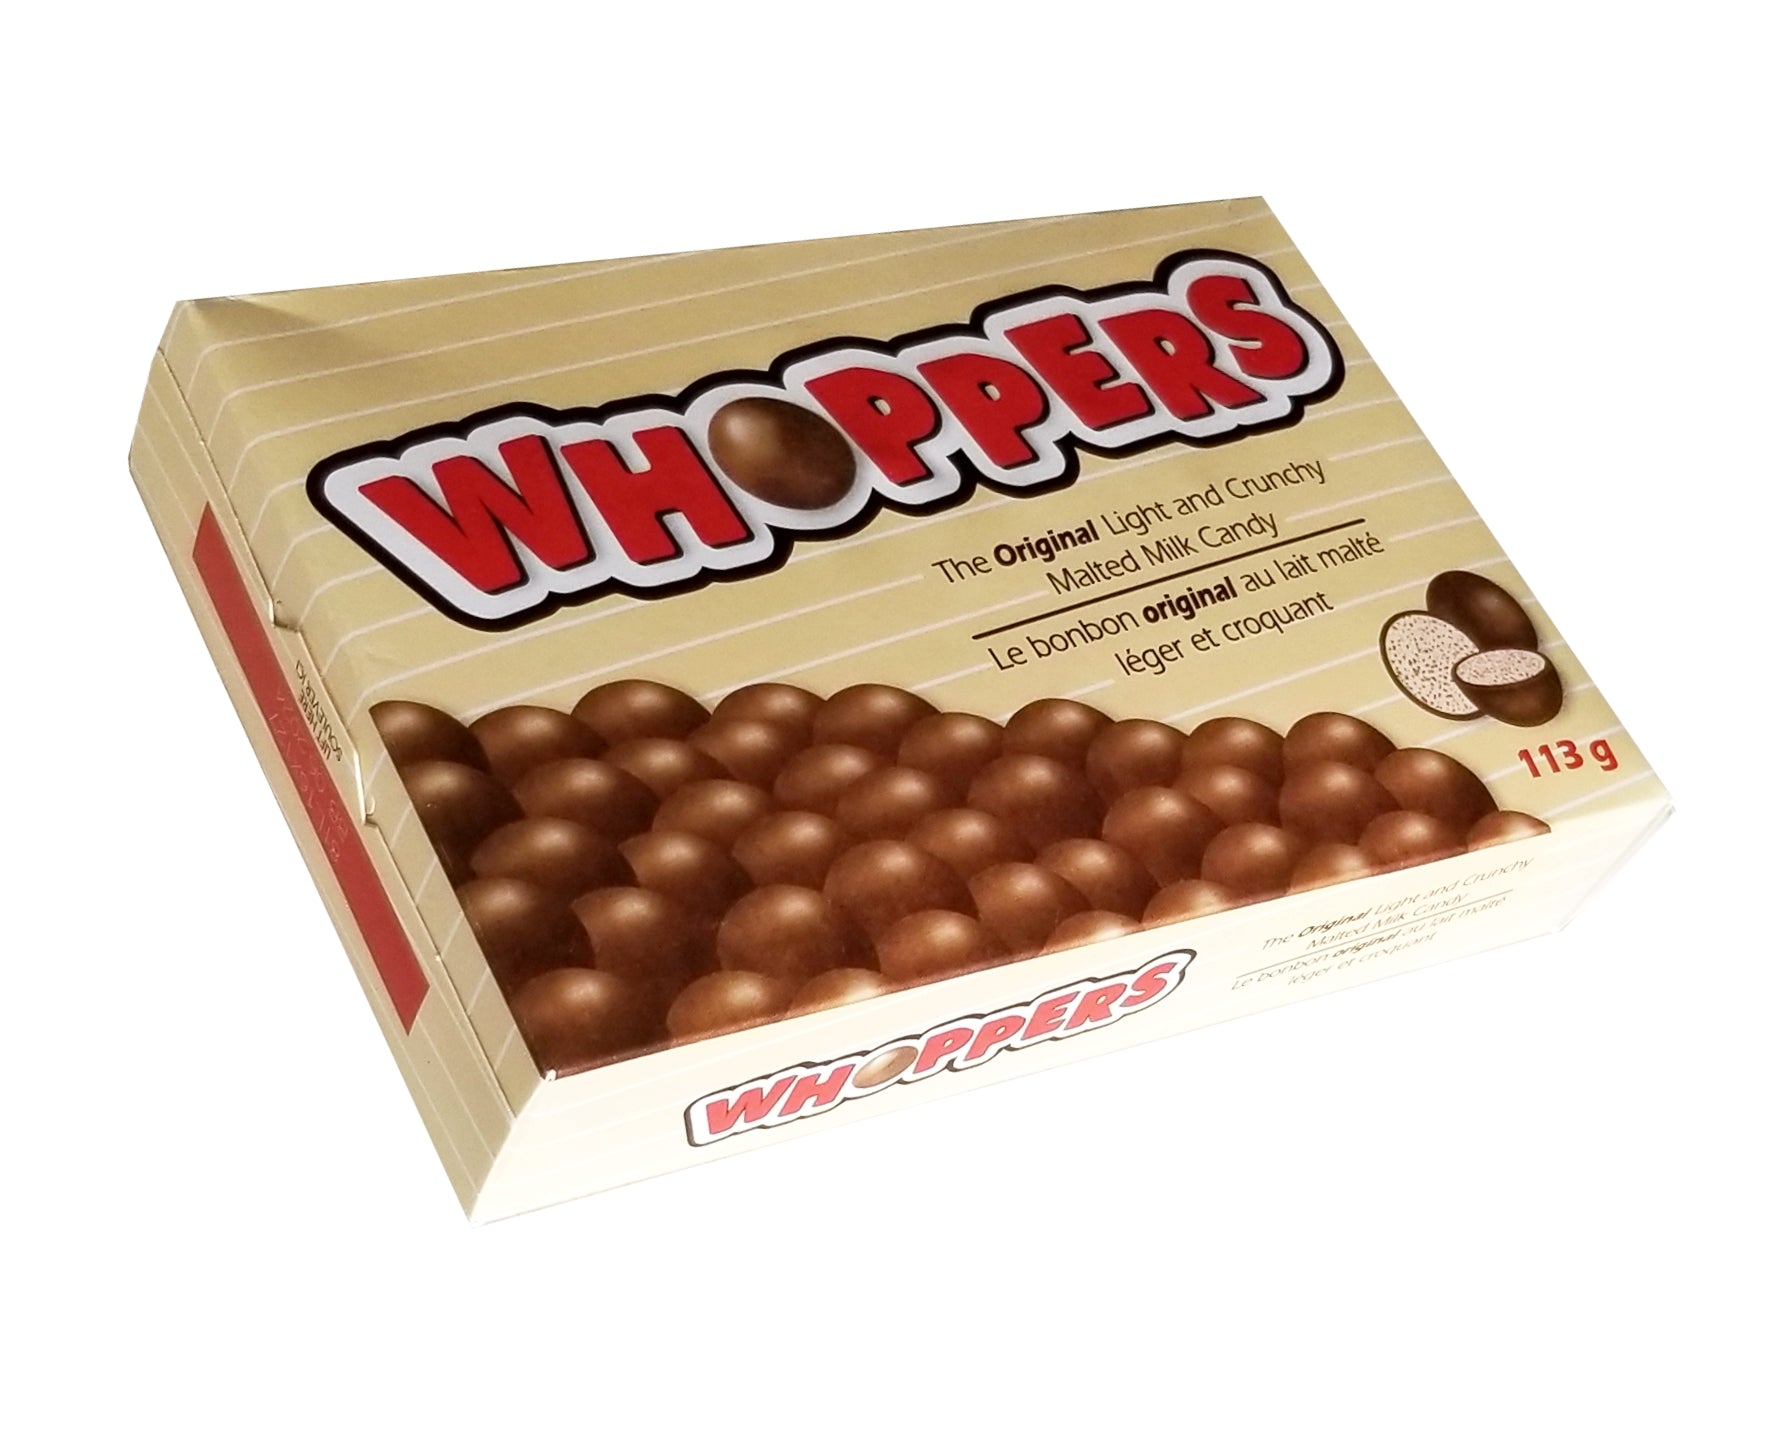 Hershey's Whoppers Original Light and Crunchy Malted Milk Candy